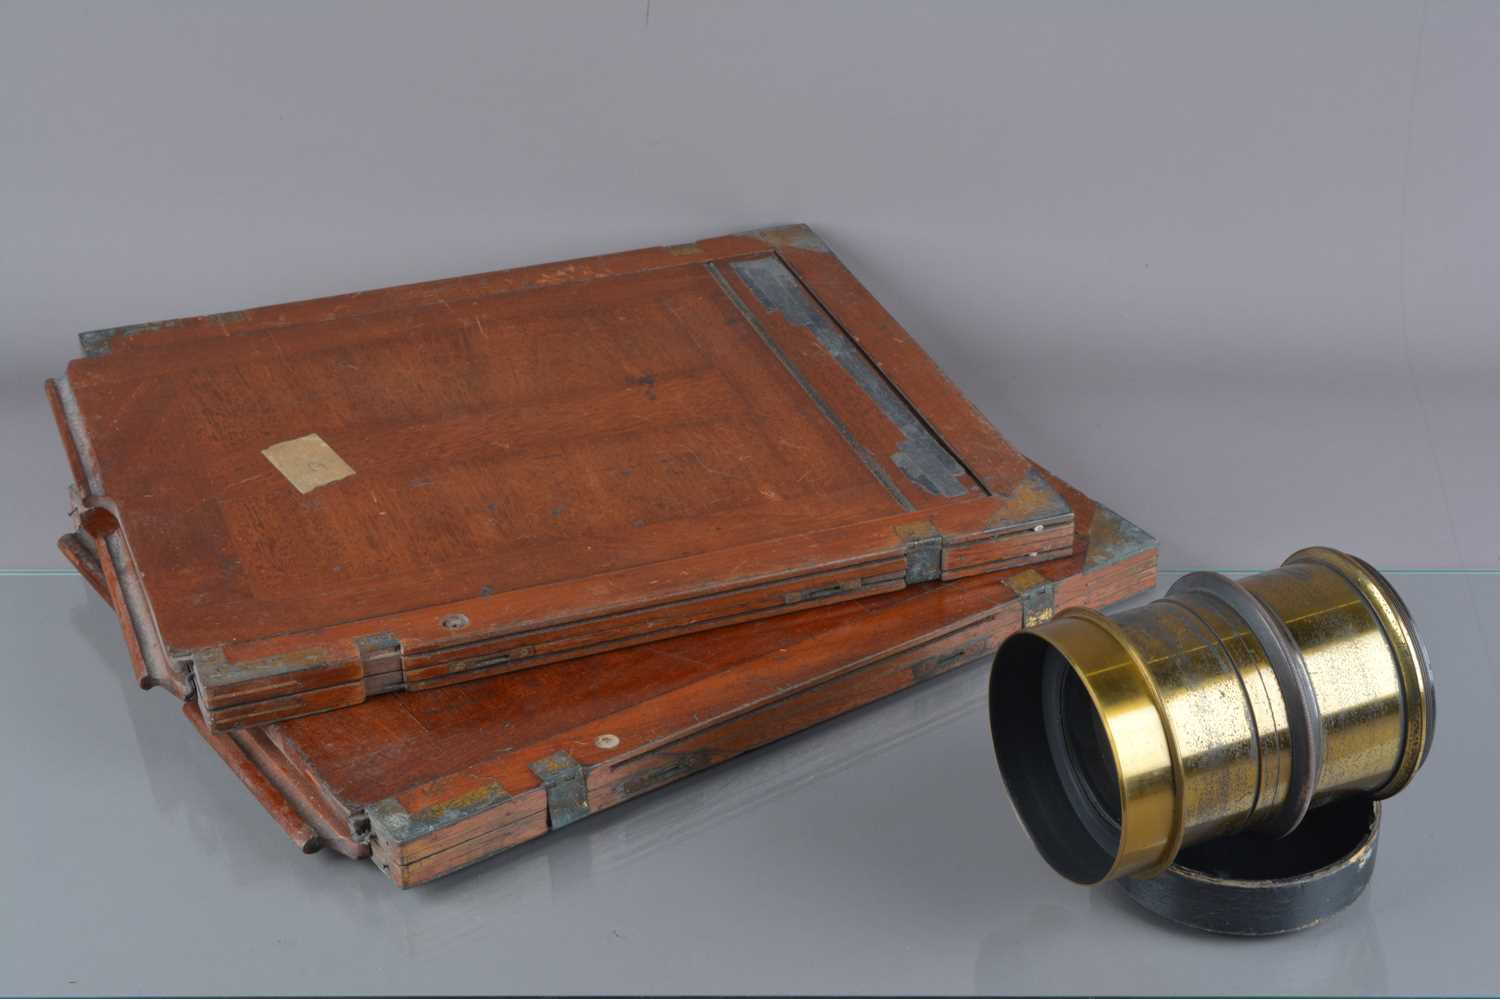 Lot 104 - A late 19th Century J Lancaster & Son lacquered brass 'Very Rapid Cabinet No 382-B-Patent' 11in Studio Camera Lens